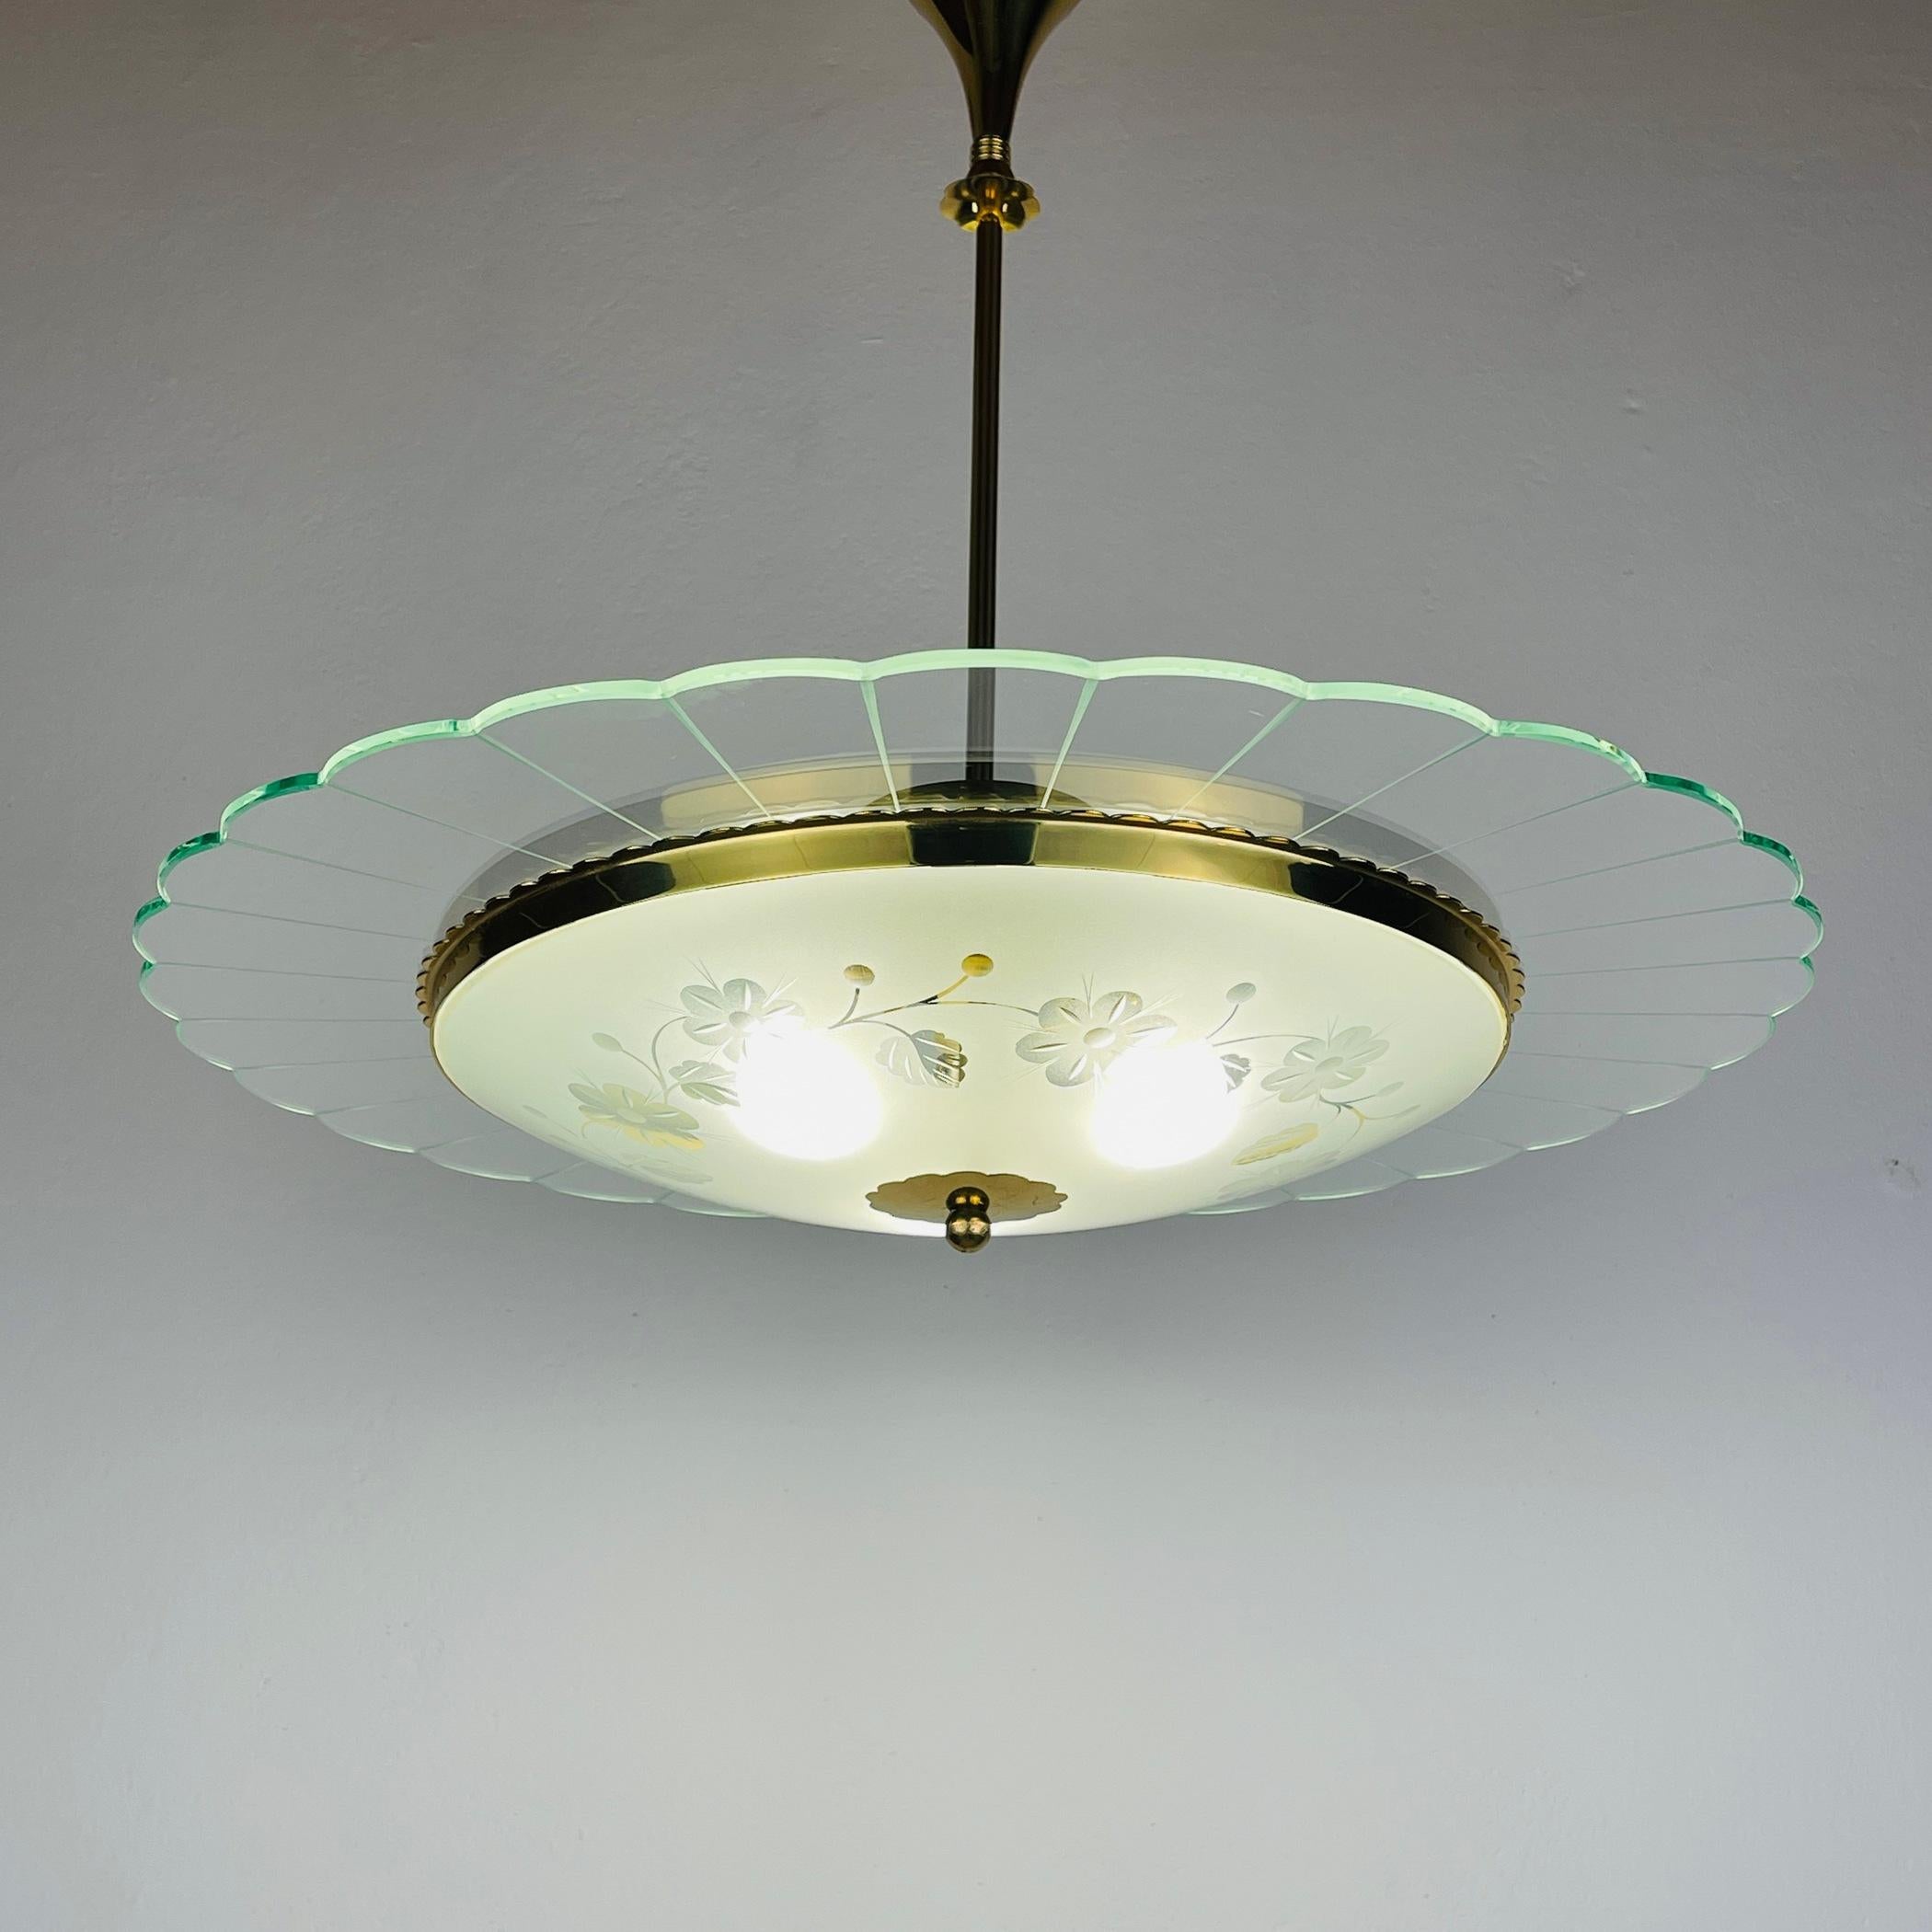 Vintage disk chandelier by Pietro Chiesa for Fontana Arte made in Italy in the 1940s.
Three exquisitely sculpted and sandblasted glass discs interact with light in contrasting manners, offering a captivating display of luminosity and shadow.
Crafted